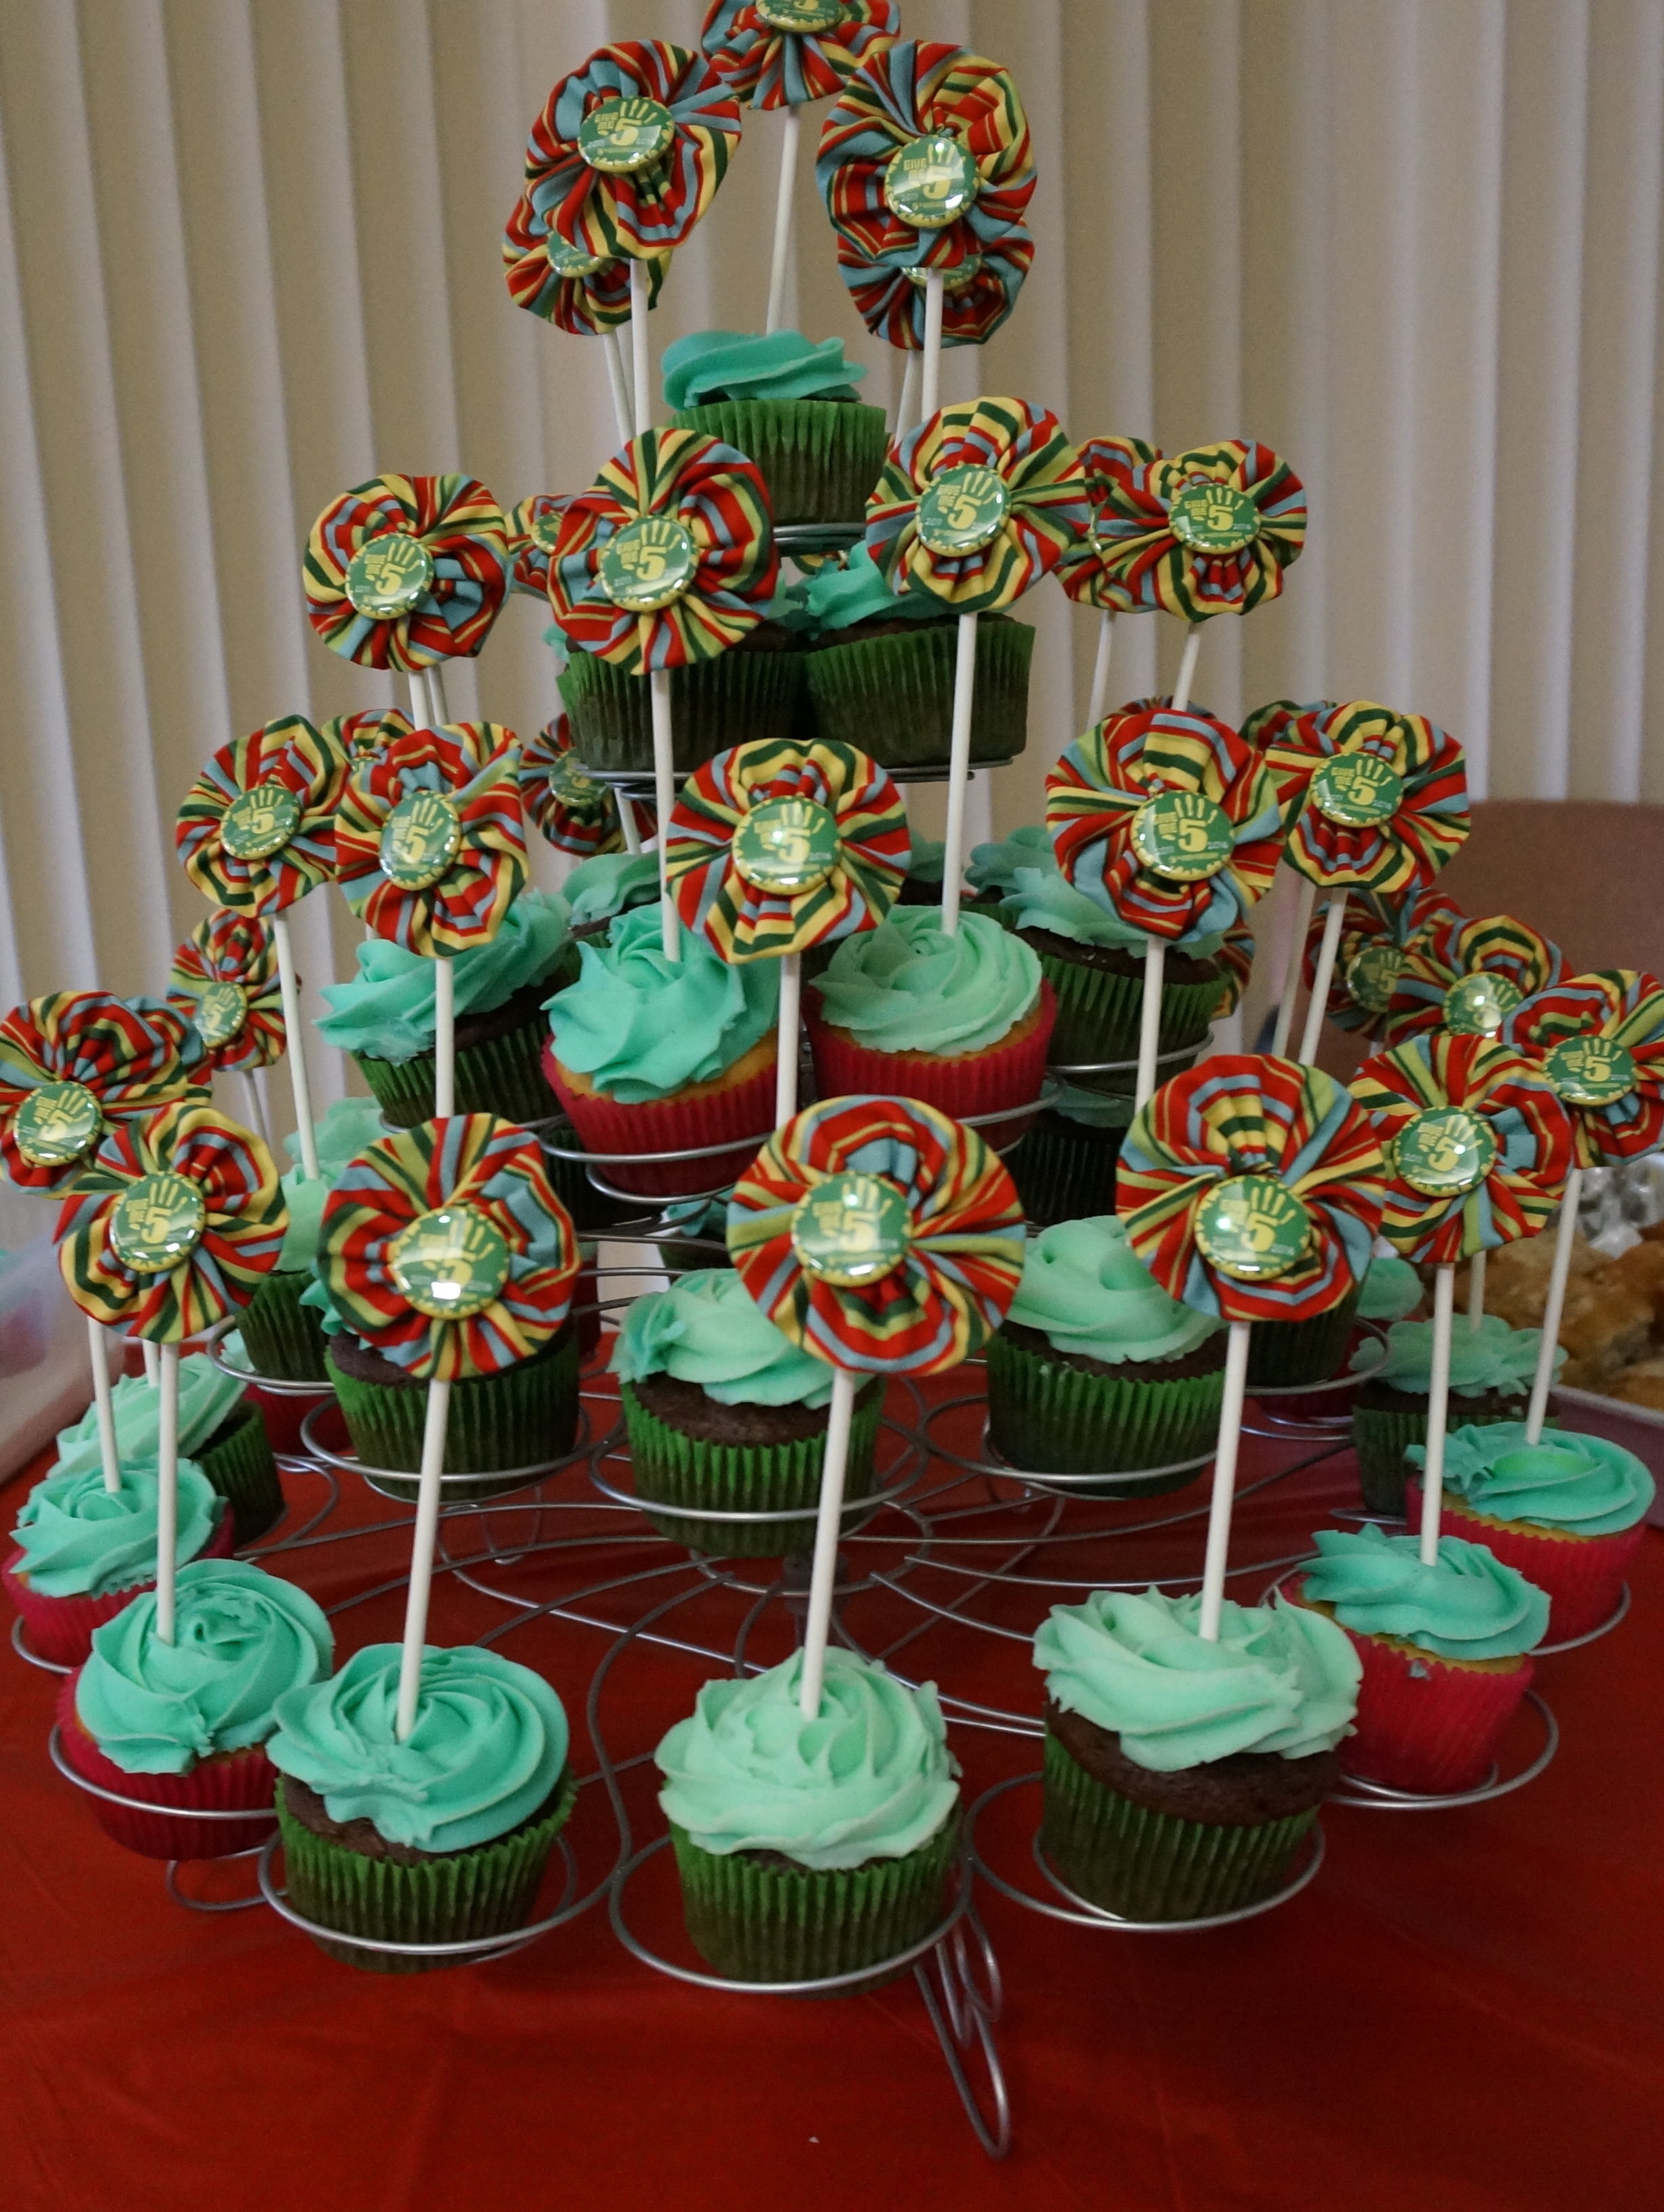 Tower of celebration cupcakes